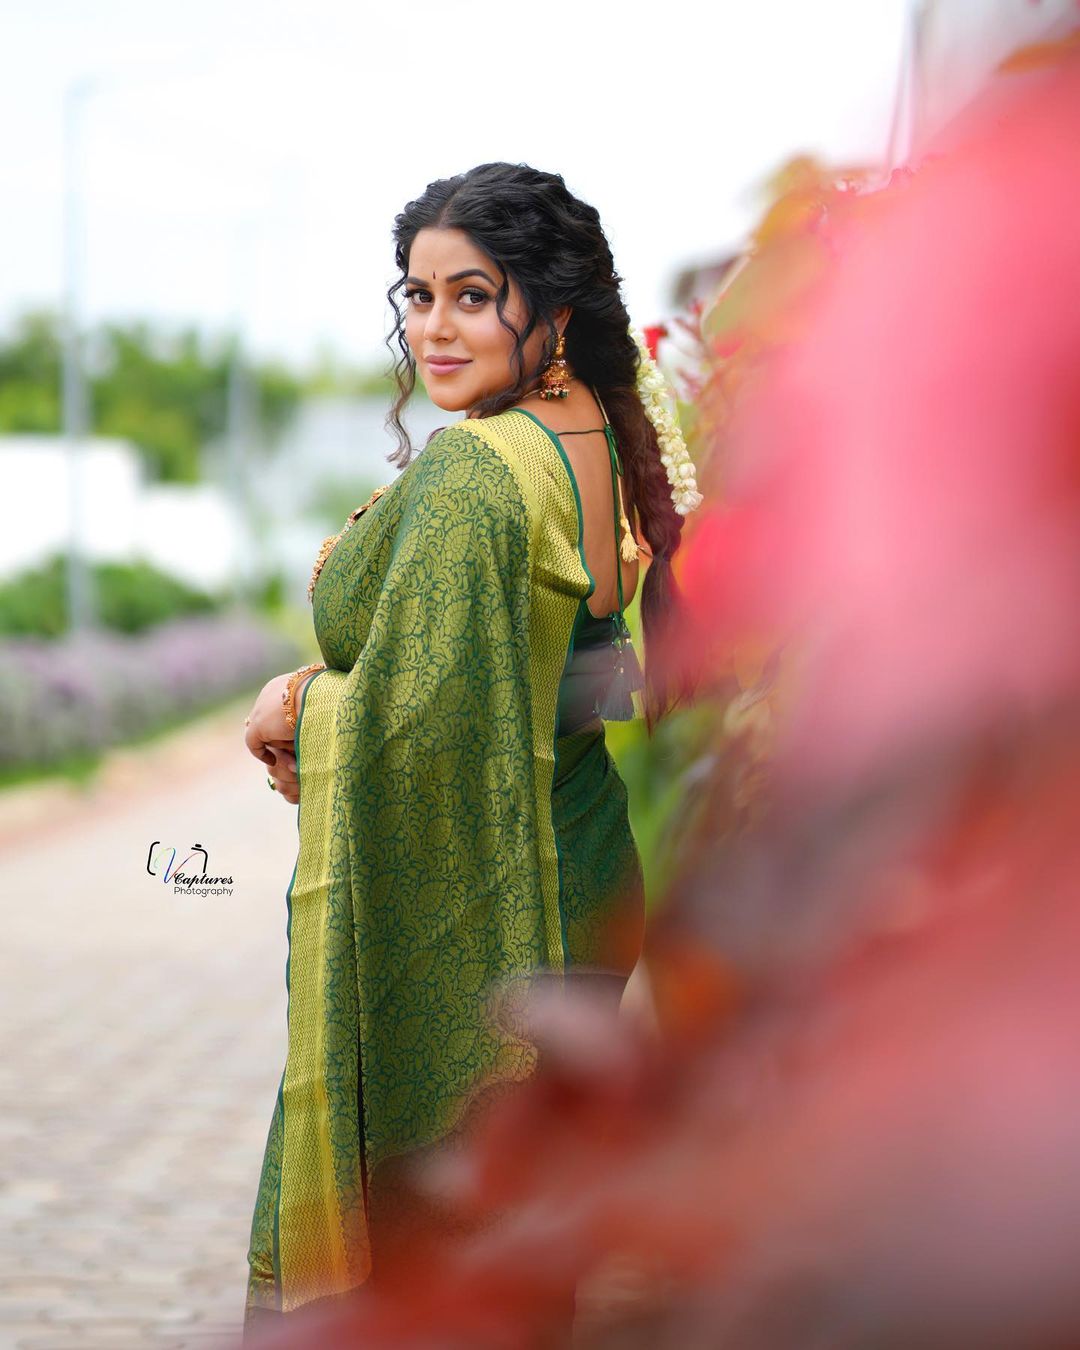 Actress poorna looks gorgeous in this saree outfit-Actress Poorna, Actressshamna, Poorna, Poorna Pics Photos,Spicy Hot Pics,Images,High Resolution WallPapers Download